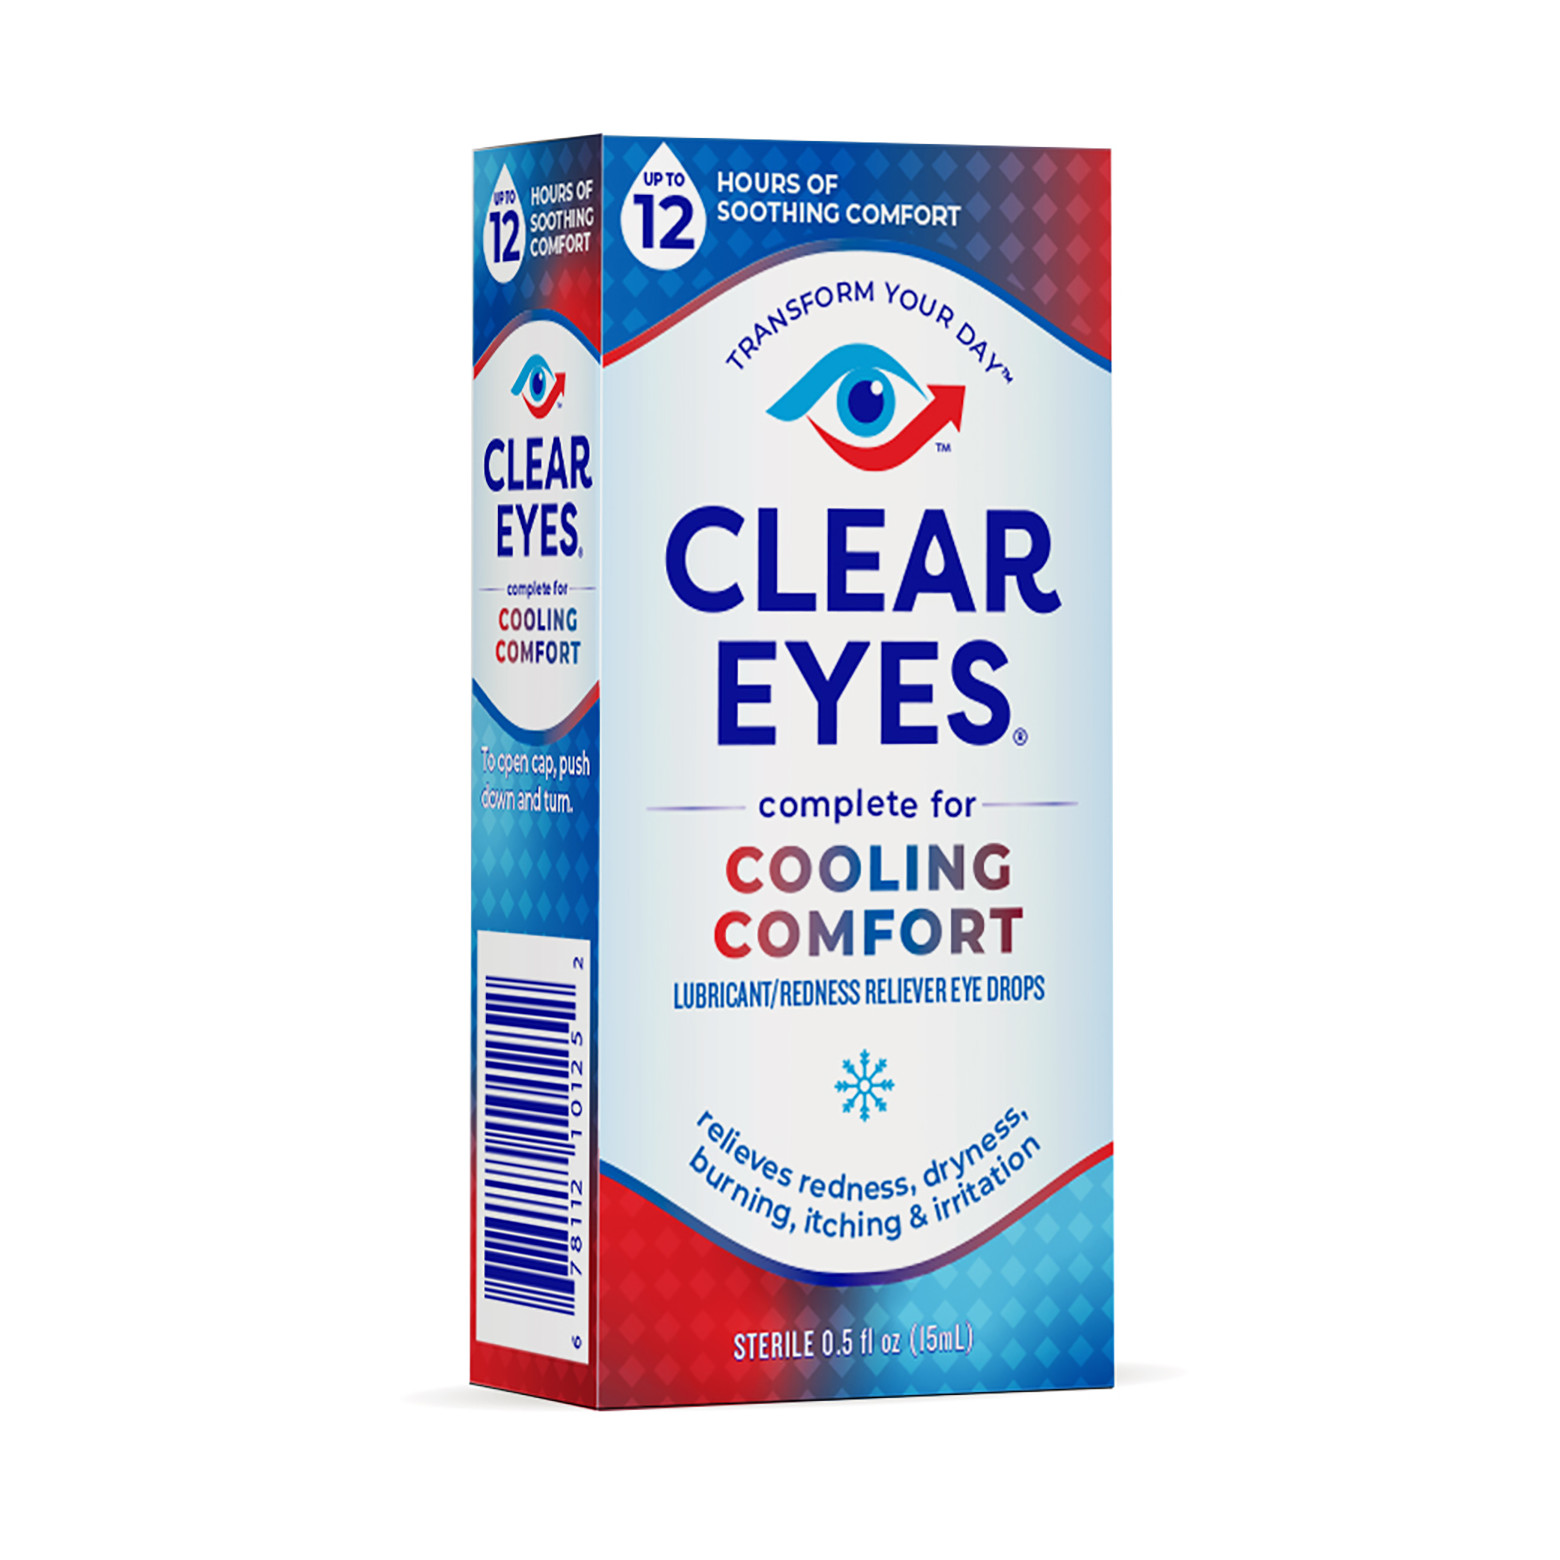 Clear Eyes Cooling Comfort Relief Lubricant Eye Drops, 0.5 fl oz 